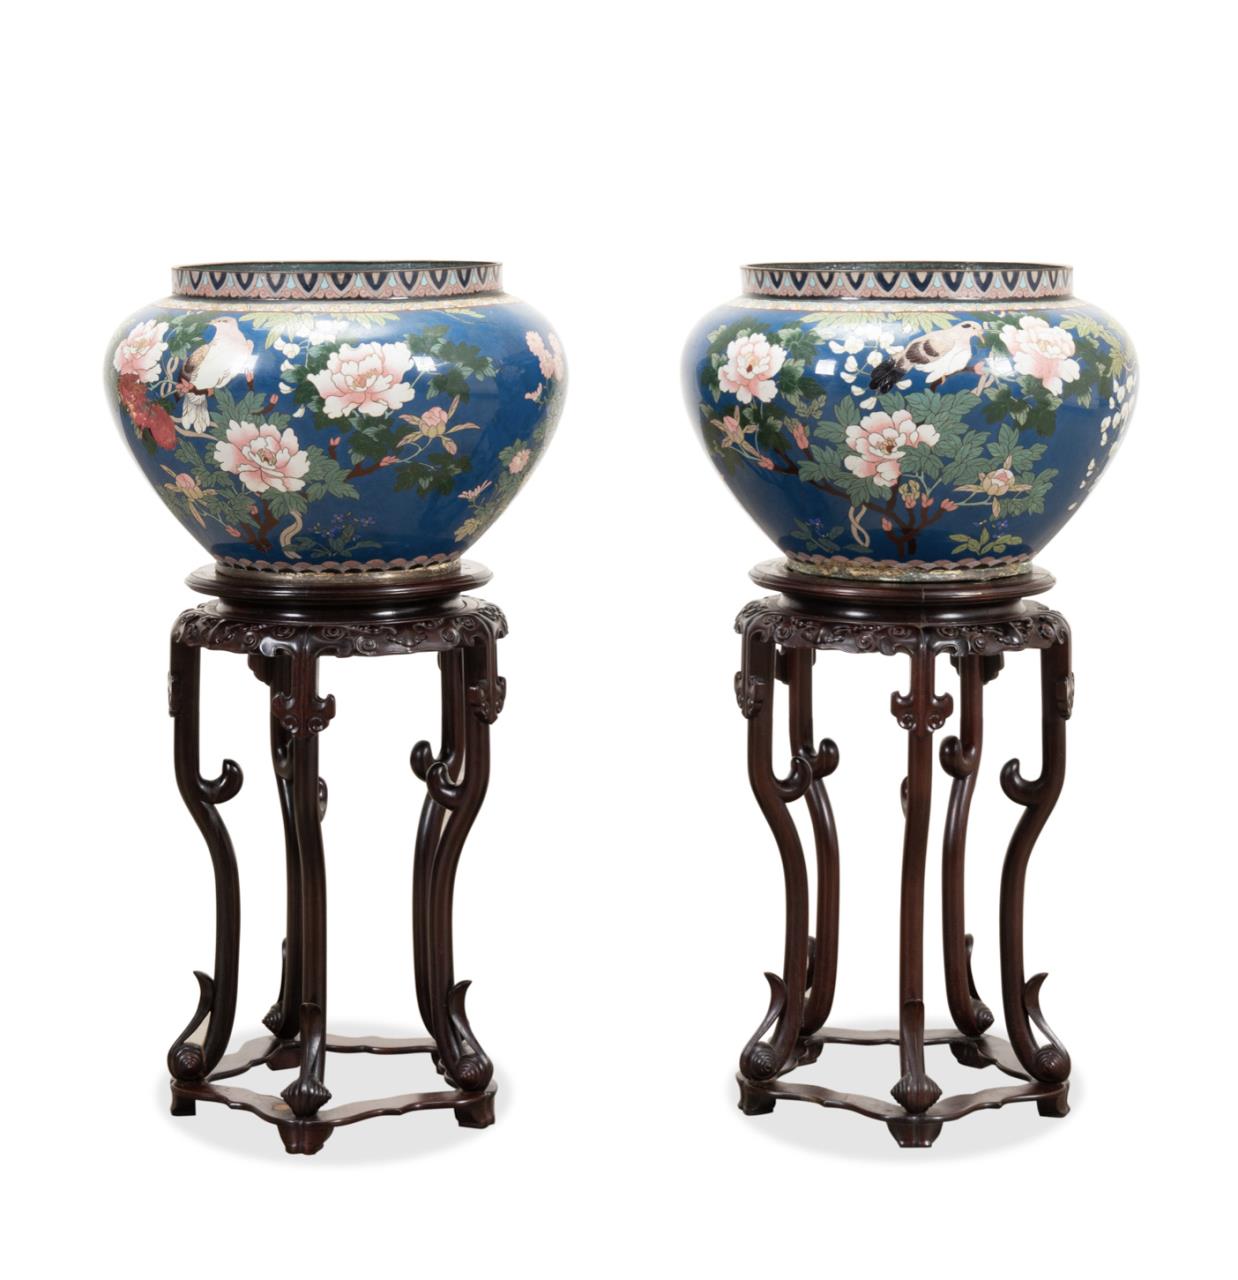 PAIR CHINESE CLOISONNE URNS ON